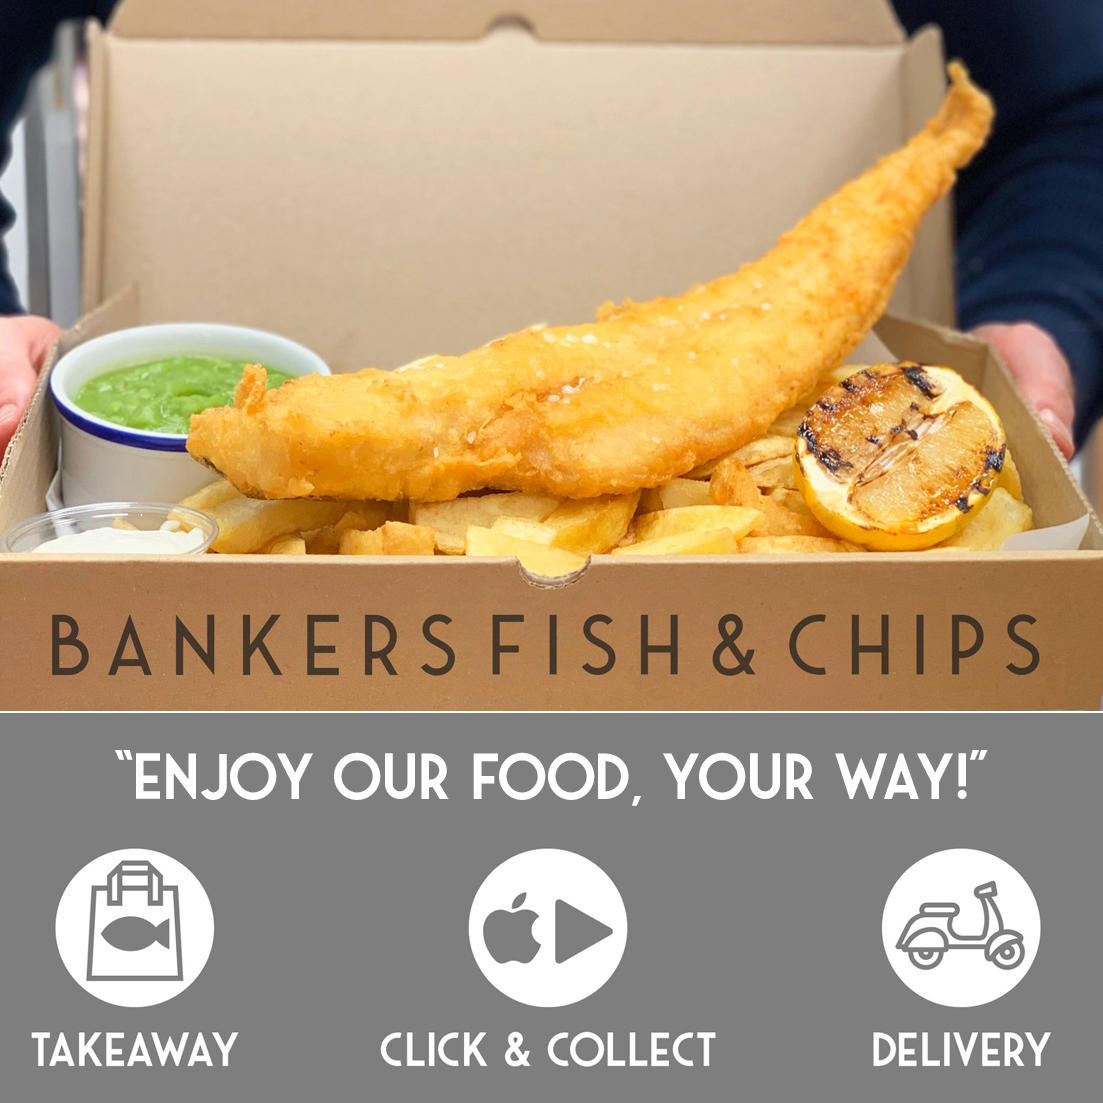 Bankers Traditional Fish & Chip Restaurant